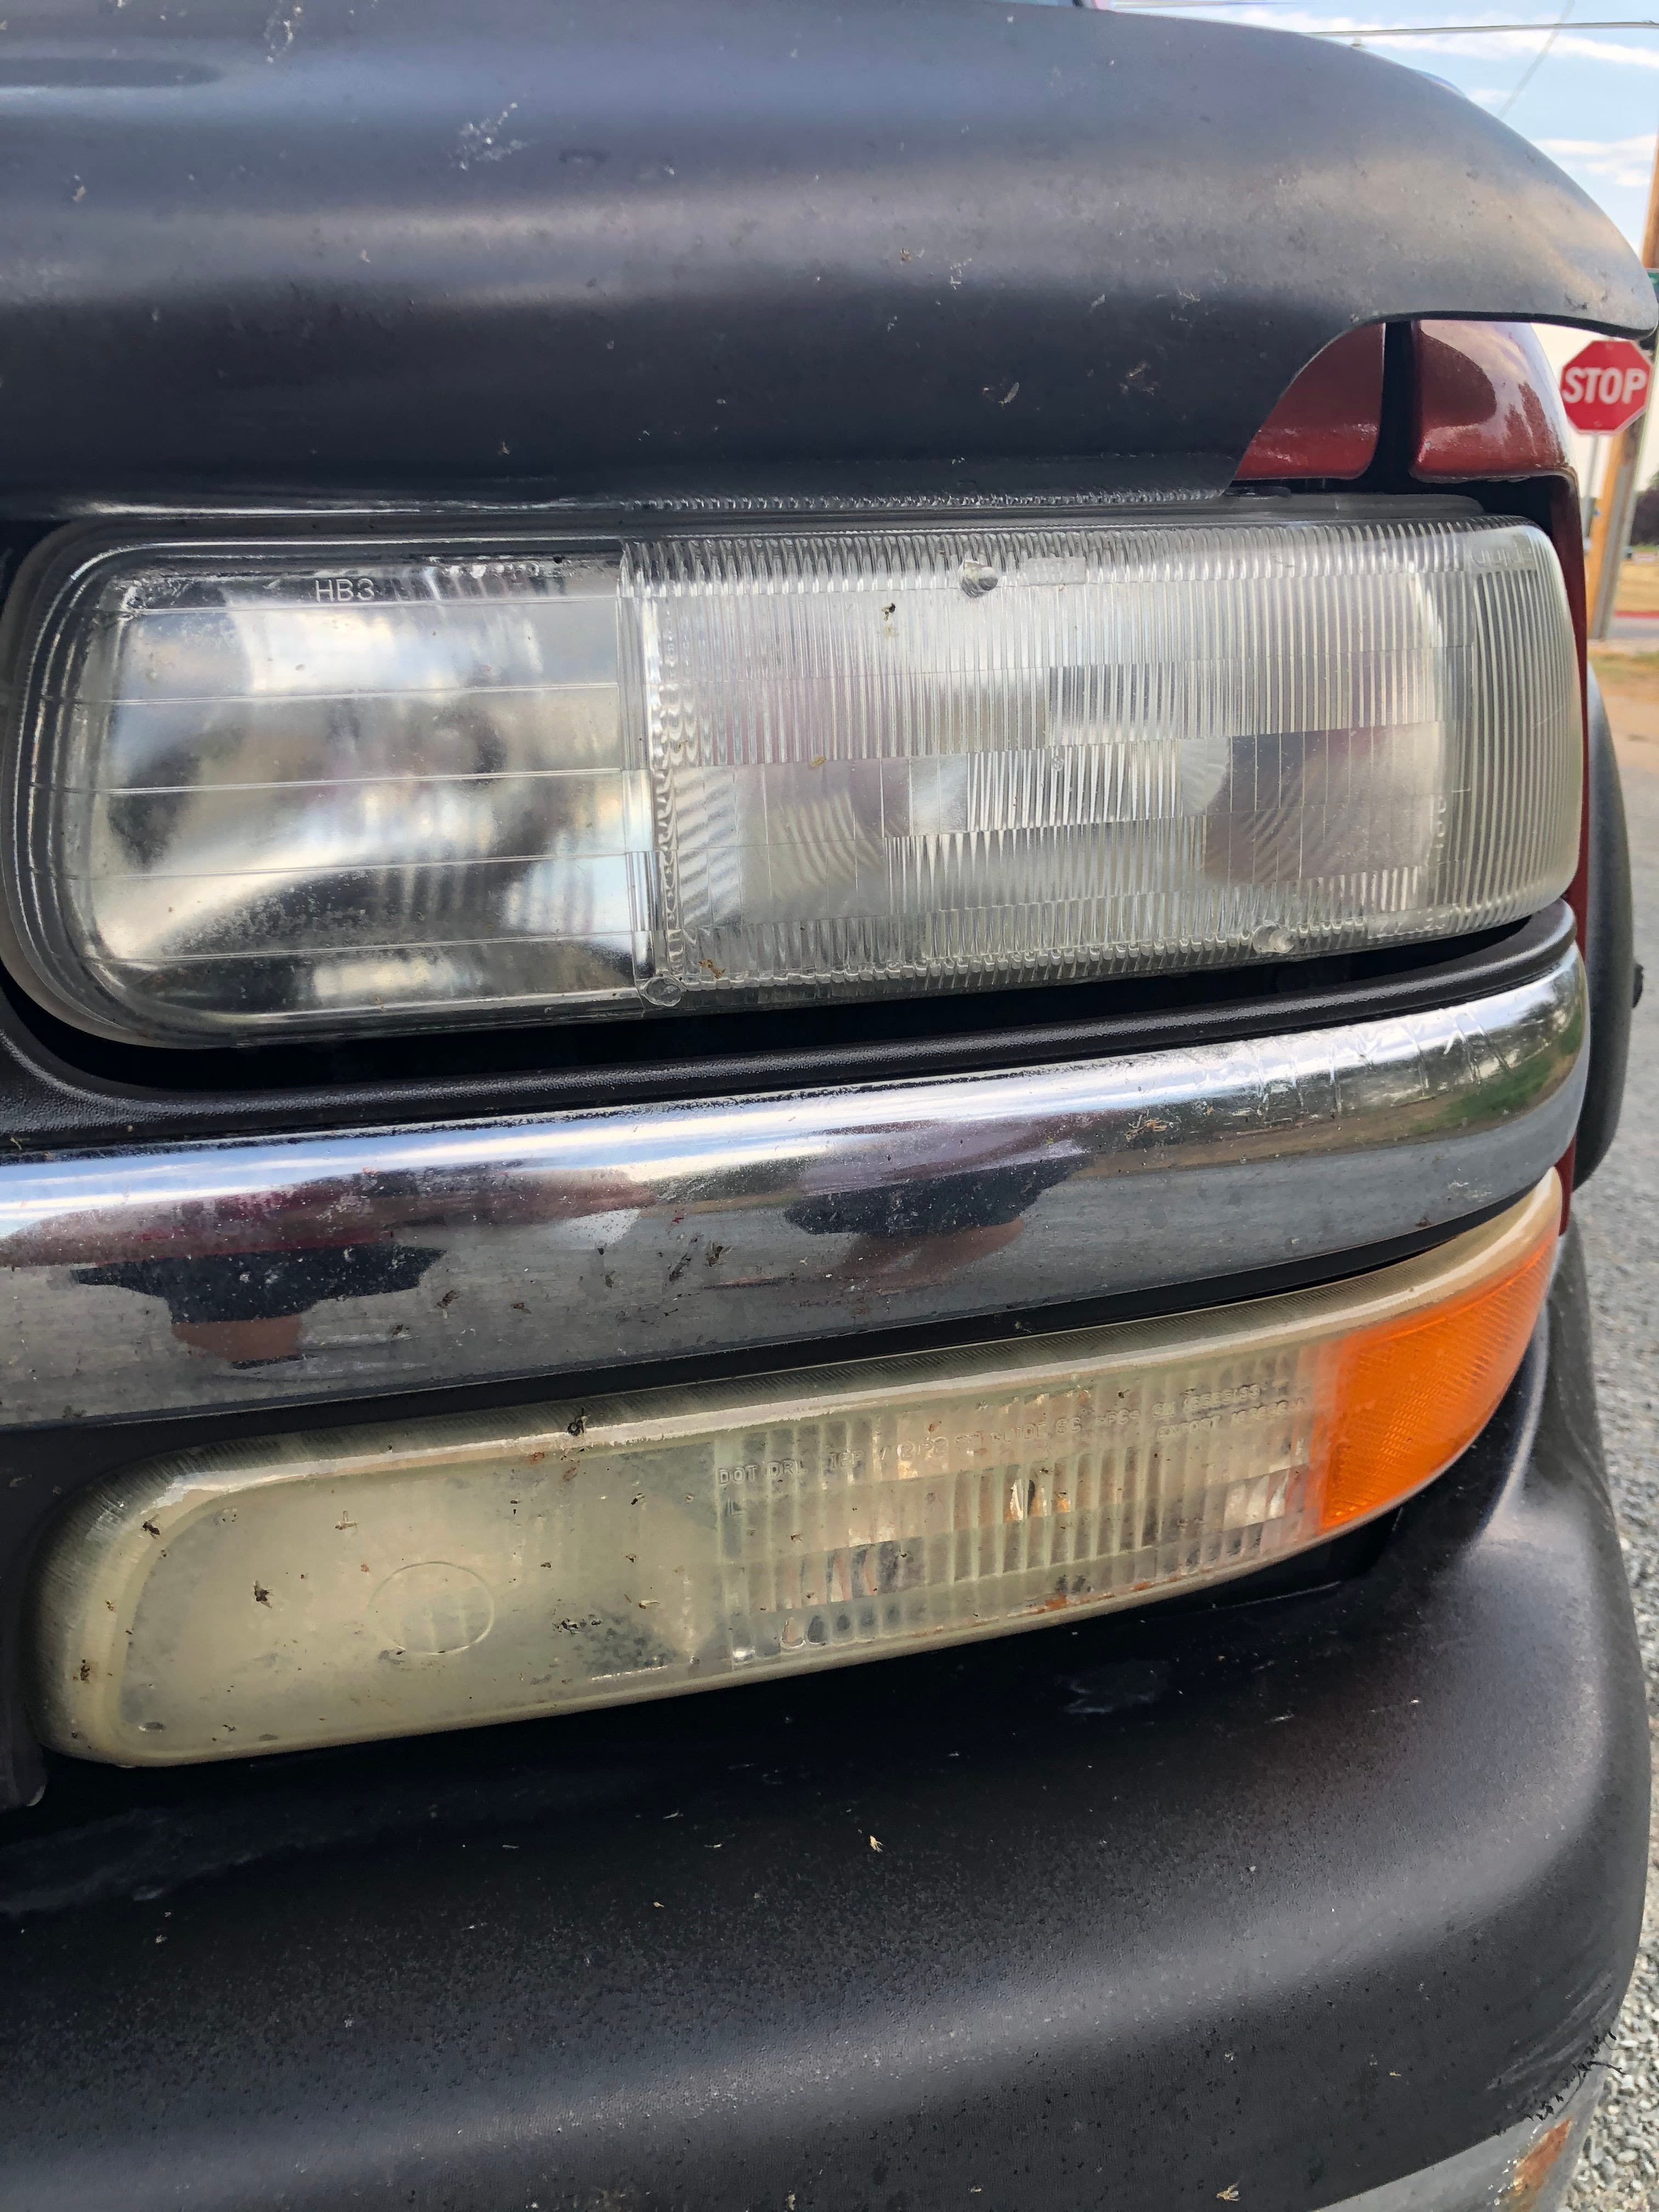 The top of this headlight has been restored and the bottom is how it looked before